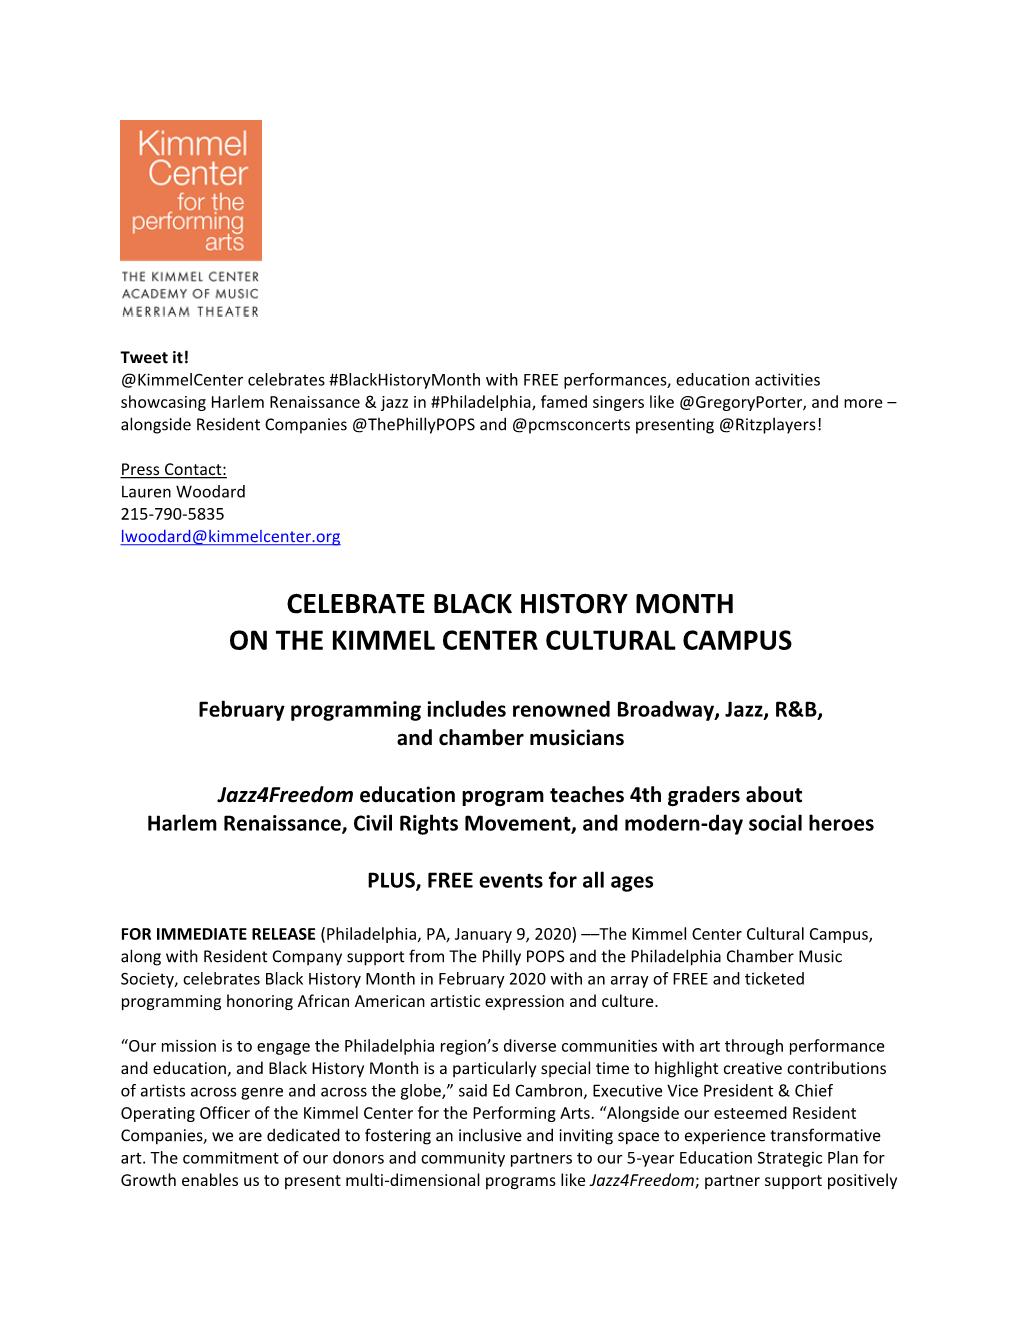 Celebrate Black History Month on the Kimmel Center Cultural Campus